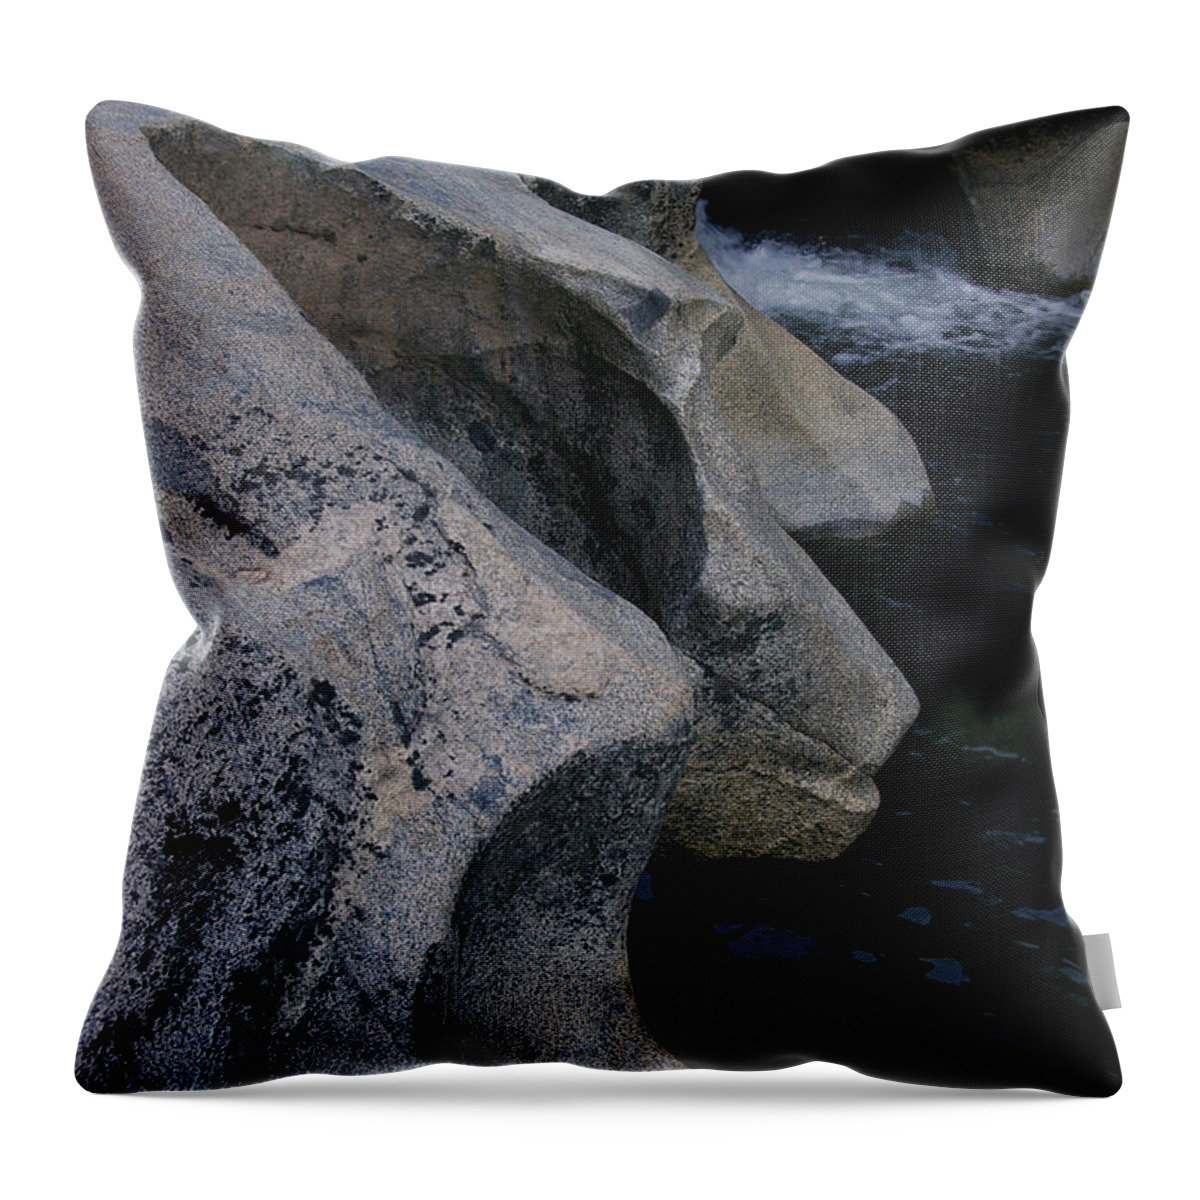  Throw Pillow featuring the photograph Happy Valley 1 by Kristy Urain